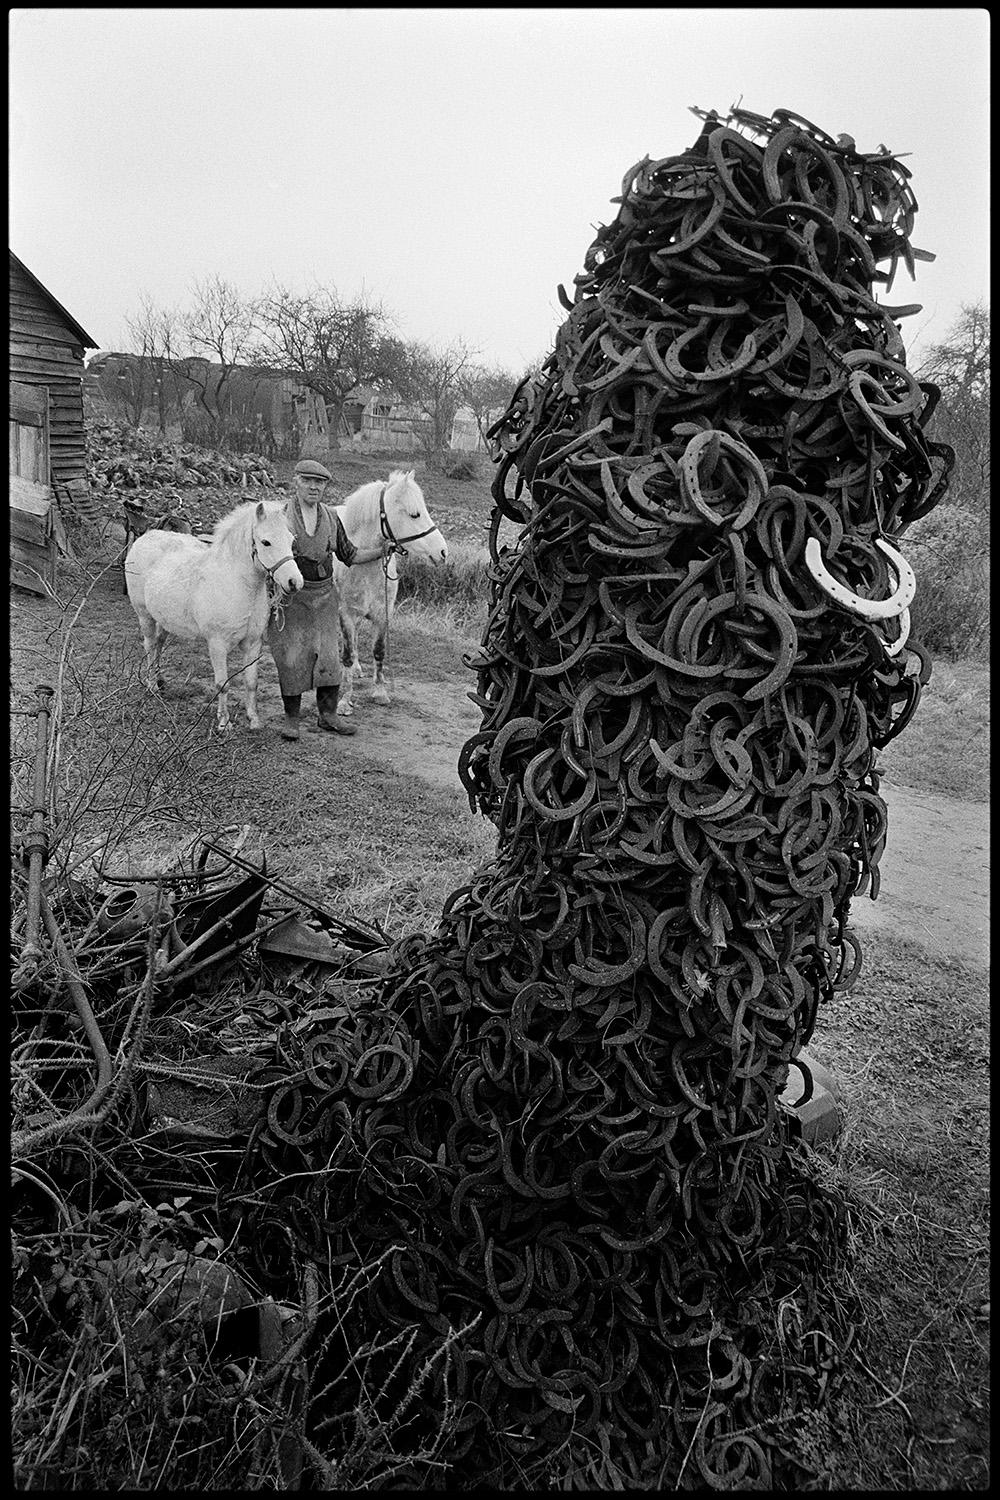 Horseshoes Pile Luck Of The Irish 

By Arthur Steel 

Paper size: 44 x 33.5" / 112 x 85 cm

Silver Gelatin Print
1981 (printed later)
unframed
hand signed
limited edition of 30

note other print sizes and framing options are available, please